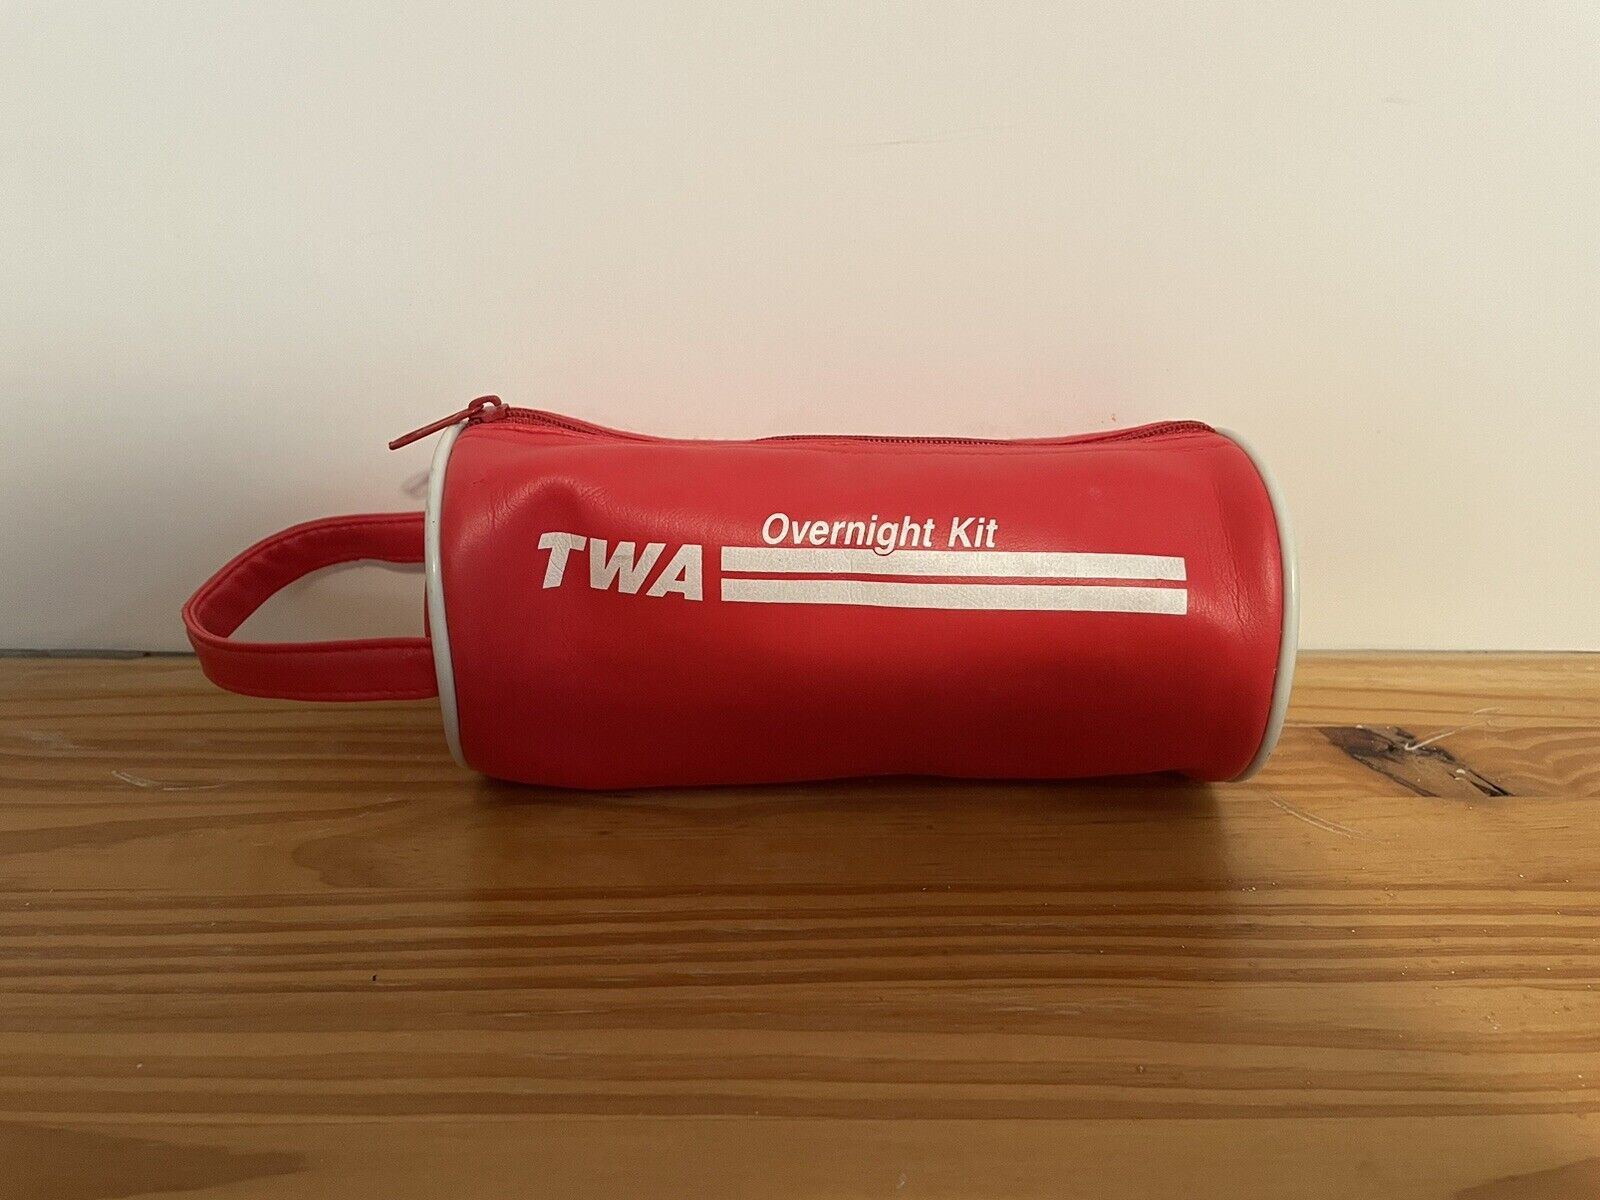 TWA overnight Kit Pre-Owned Collectable